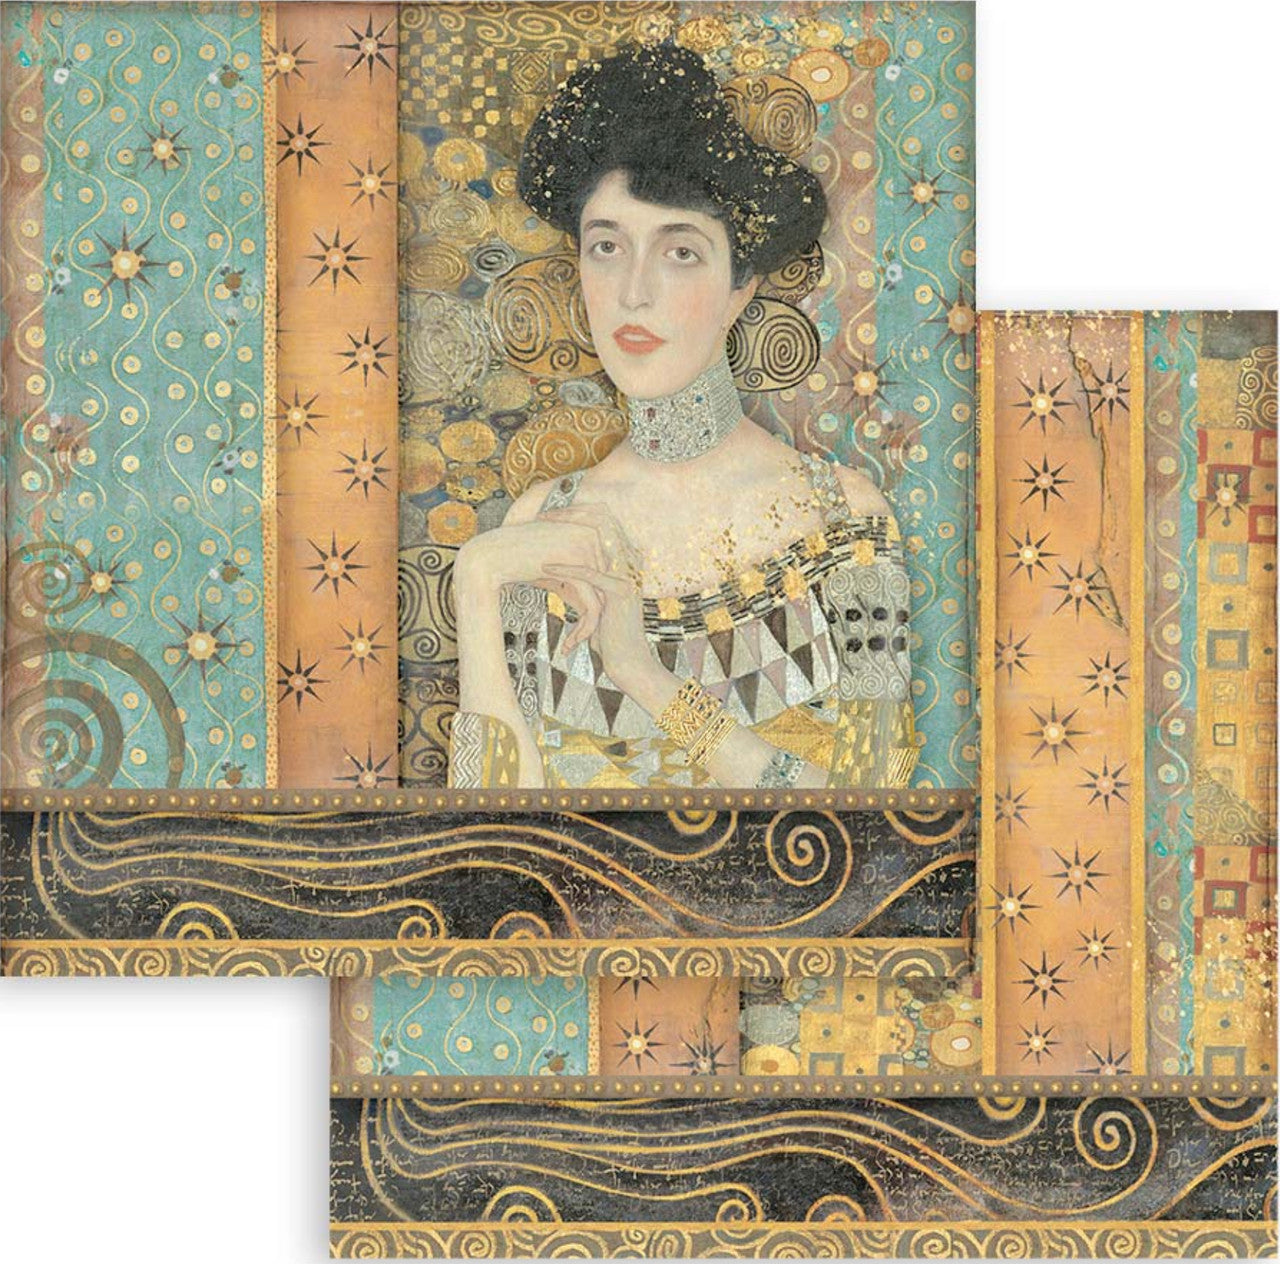 Stamperia (8"x8") Double Face Paper Pack -  Klimt